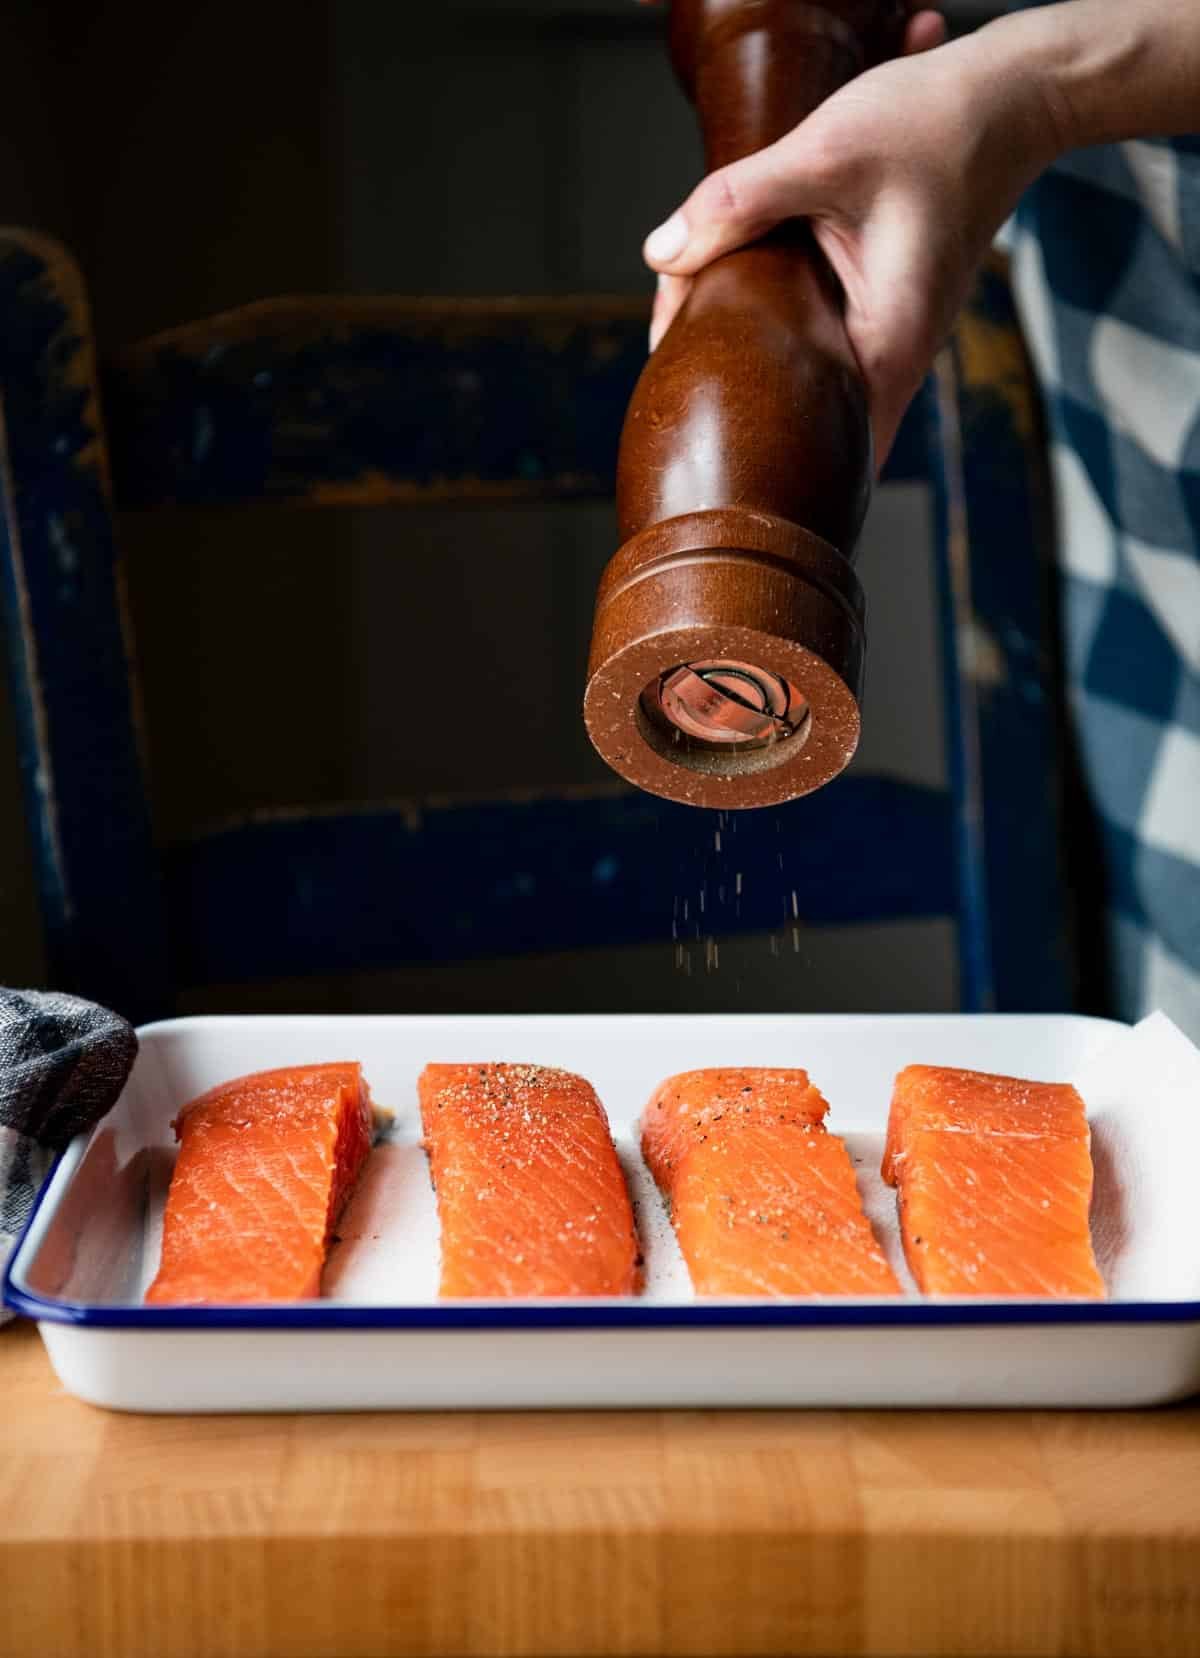 Seasoning salmon with salt and pepper.